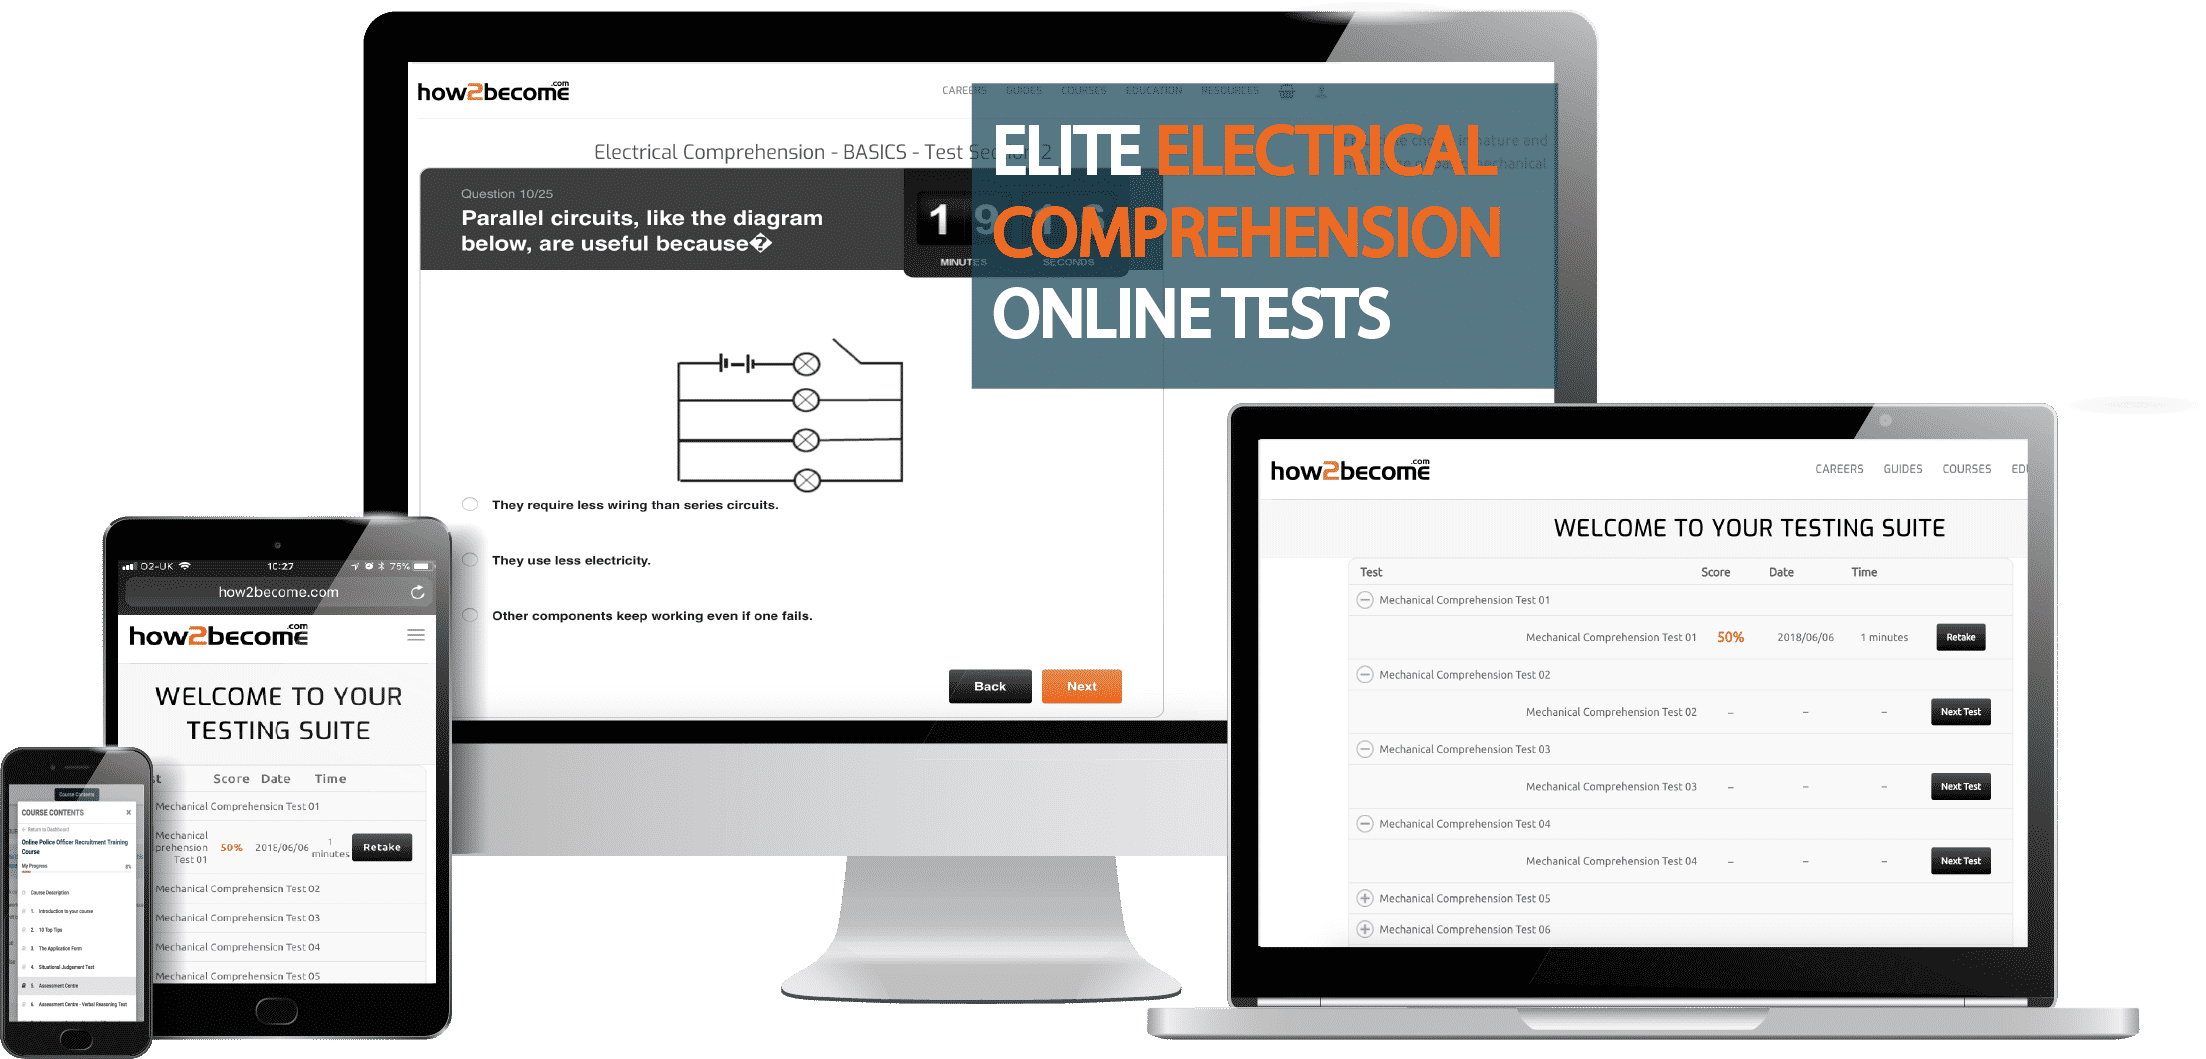 electrical-comprehension-elite-online-testing-suite-30-days-free-access-thereafter-5-95-vat